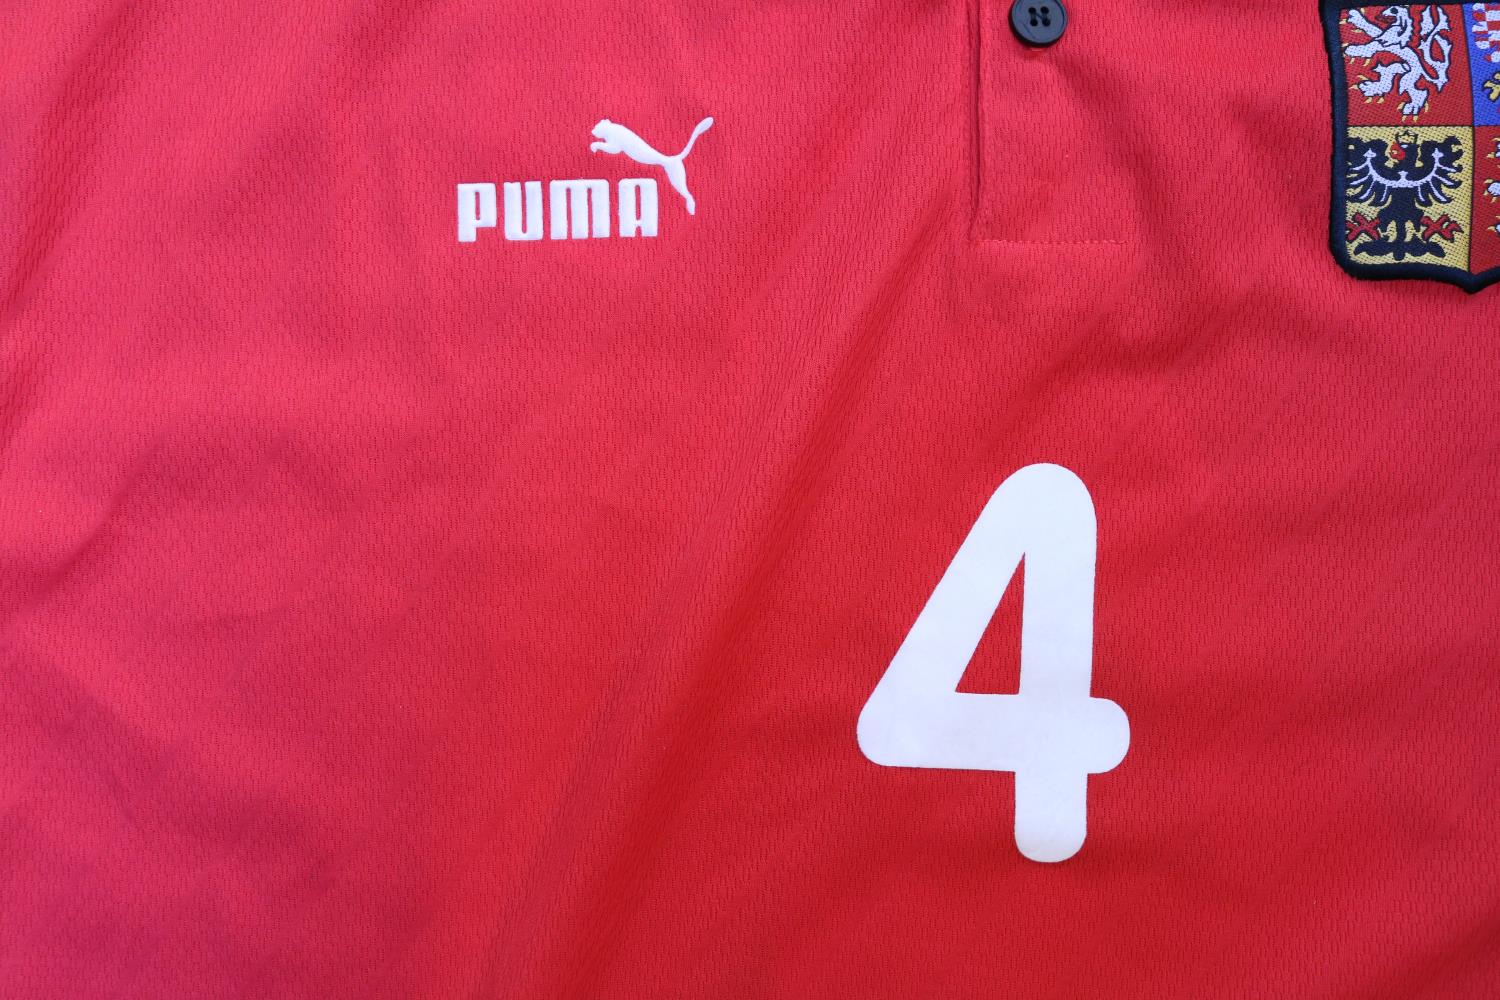 PAVEL NEDVED 1996 MATCH WORN CZECH REPUBLIC JERSEY The Puma red #4 jersey was worn by the Czech - Image 3 of 7